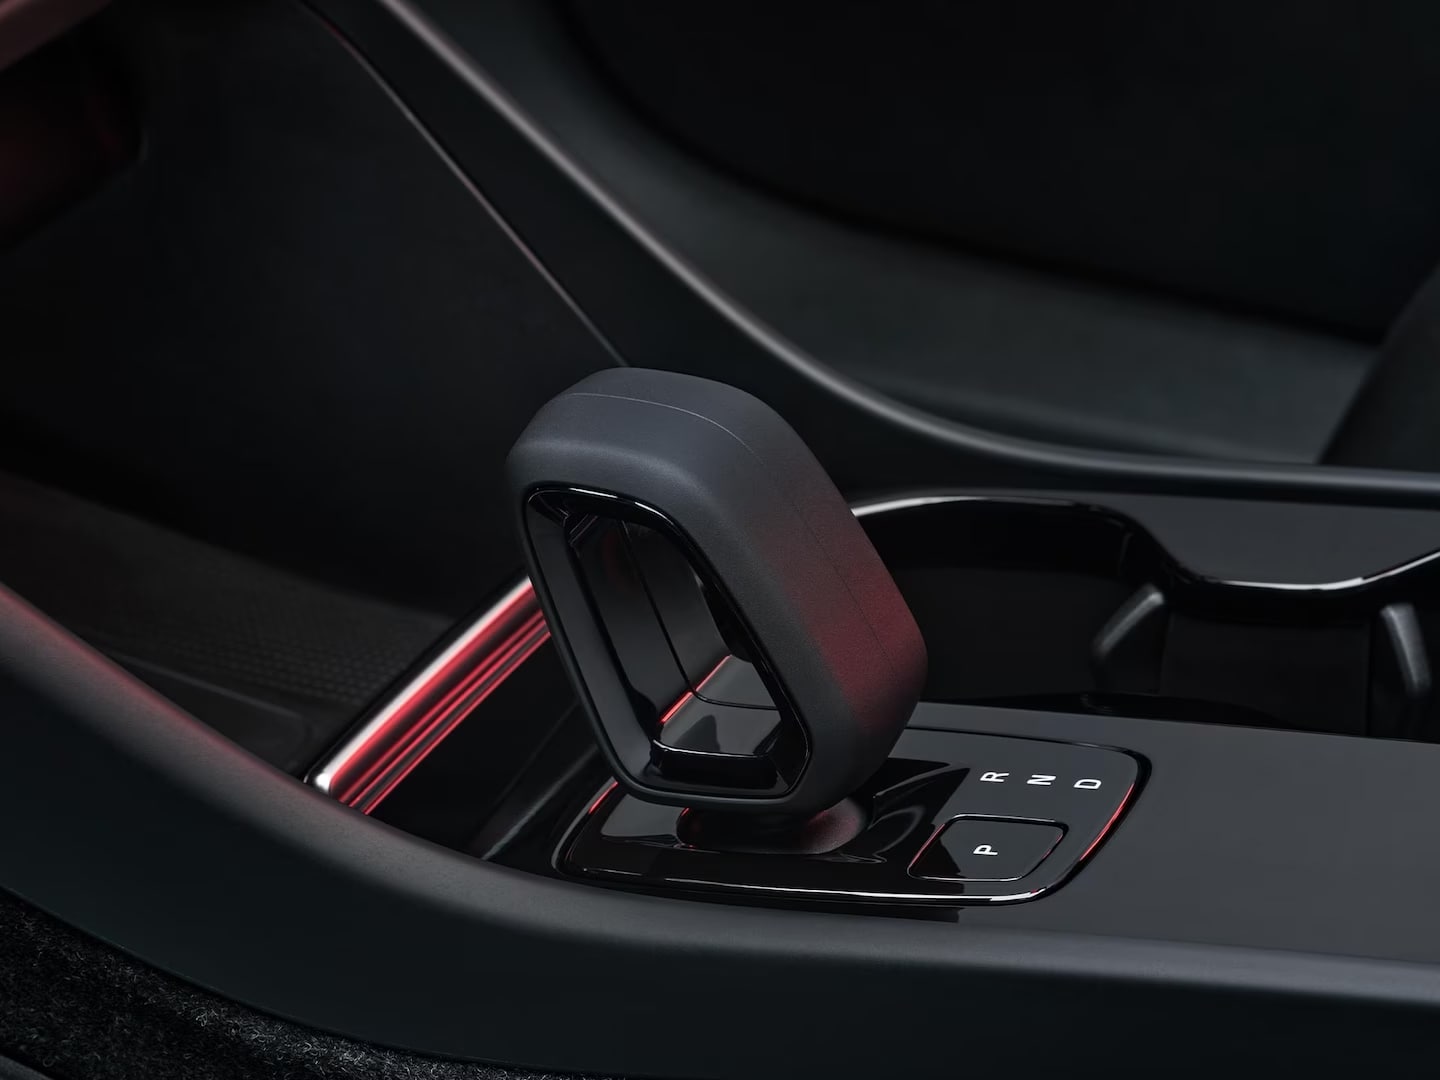 Gear shifter and storage in the front seat of the Volvo C40 Recharge.